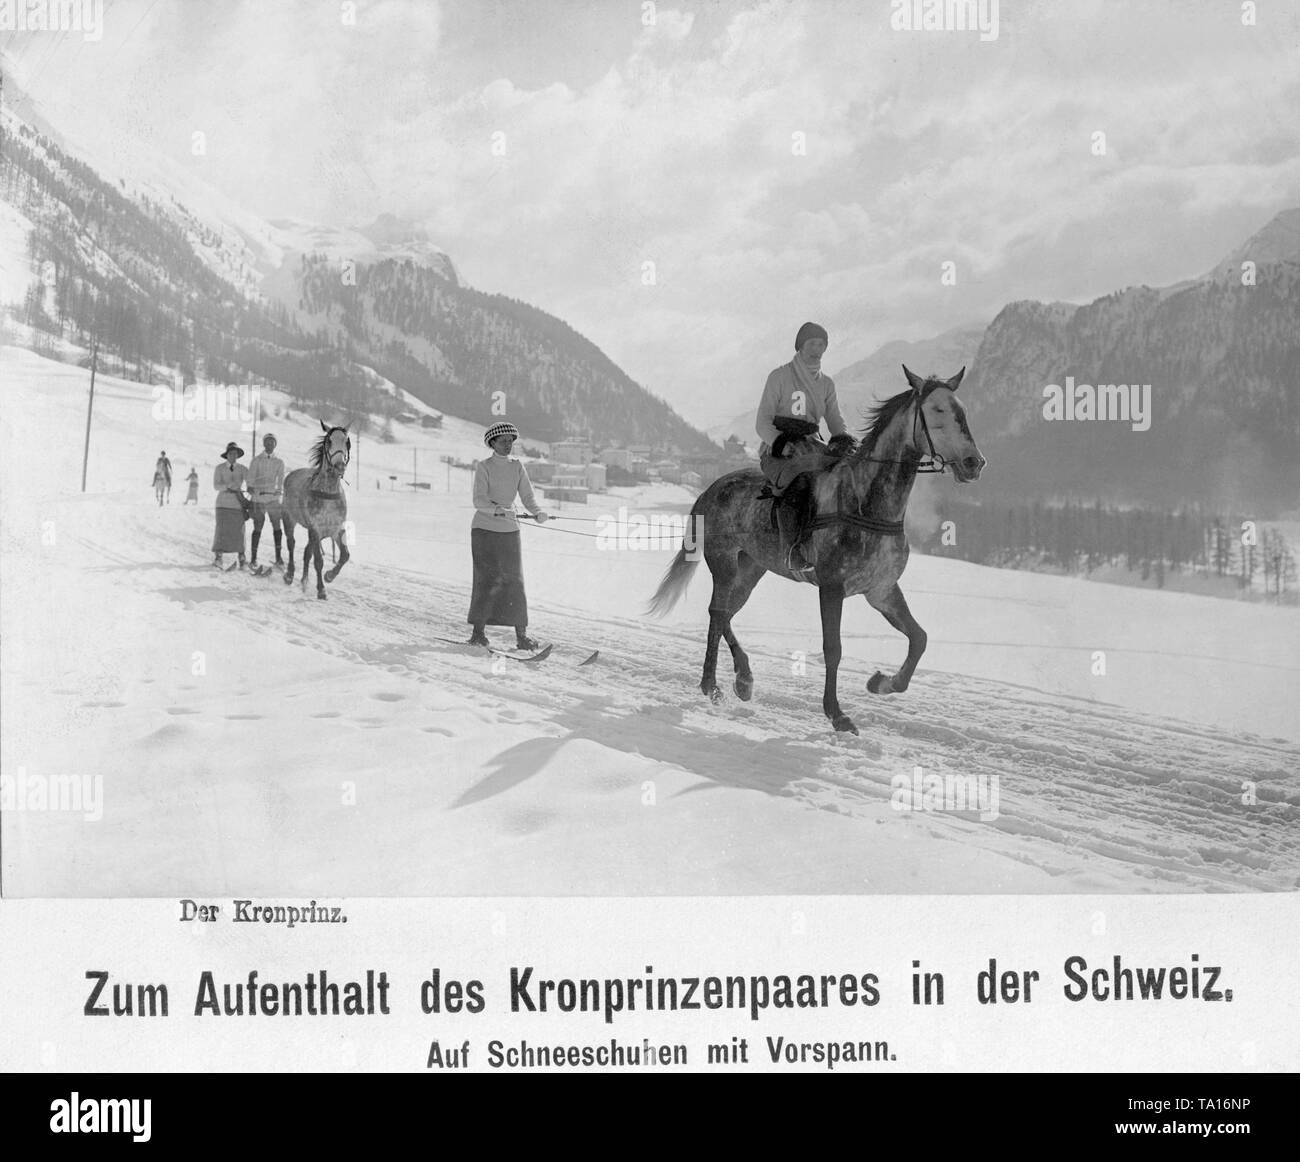 Crown Prince Wilhelm of Prussia (behind the second horse at right) and his wife Cecilie (left next to her husband) doing winter sports in Switzerland. The two are wearing skis and are pulled through the winter landscape by a horse. Stock Photo